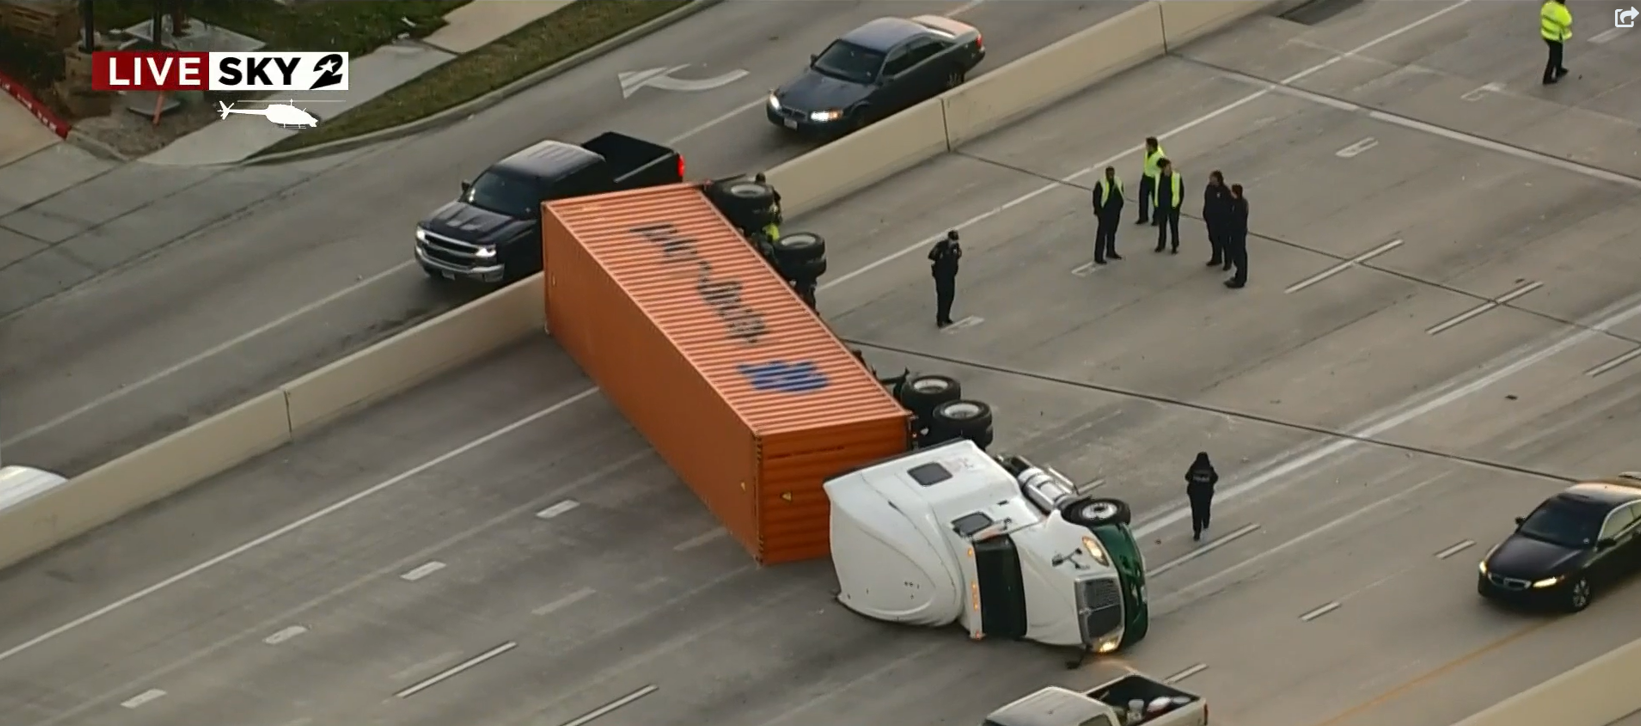 18-Wheeler Overturned on Highway 290, Causing Road Delays